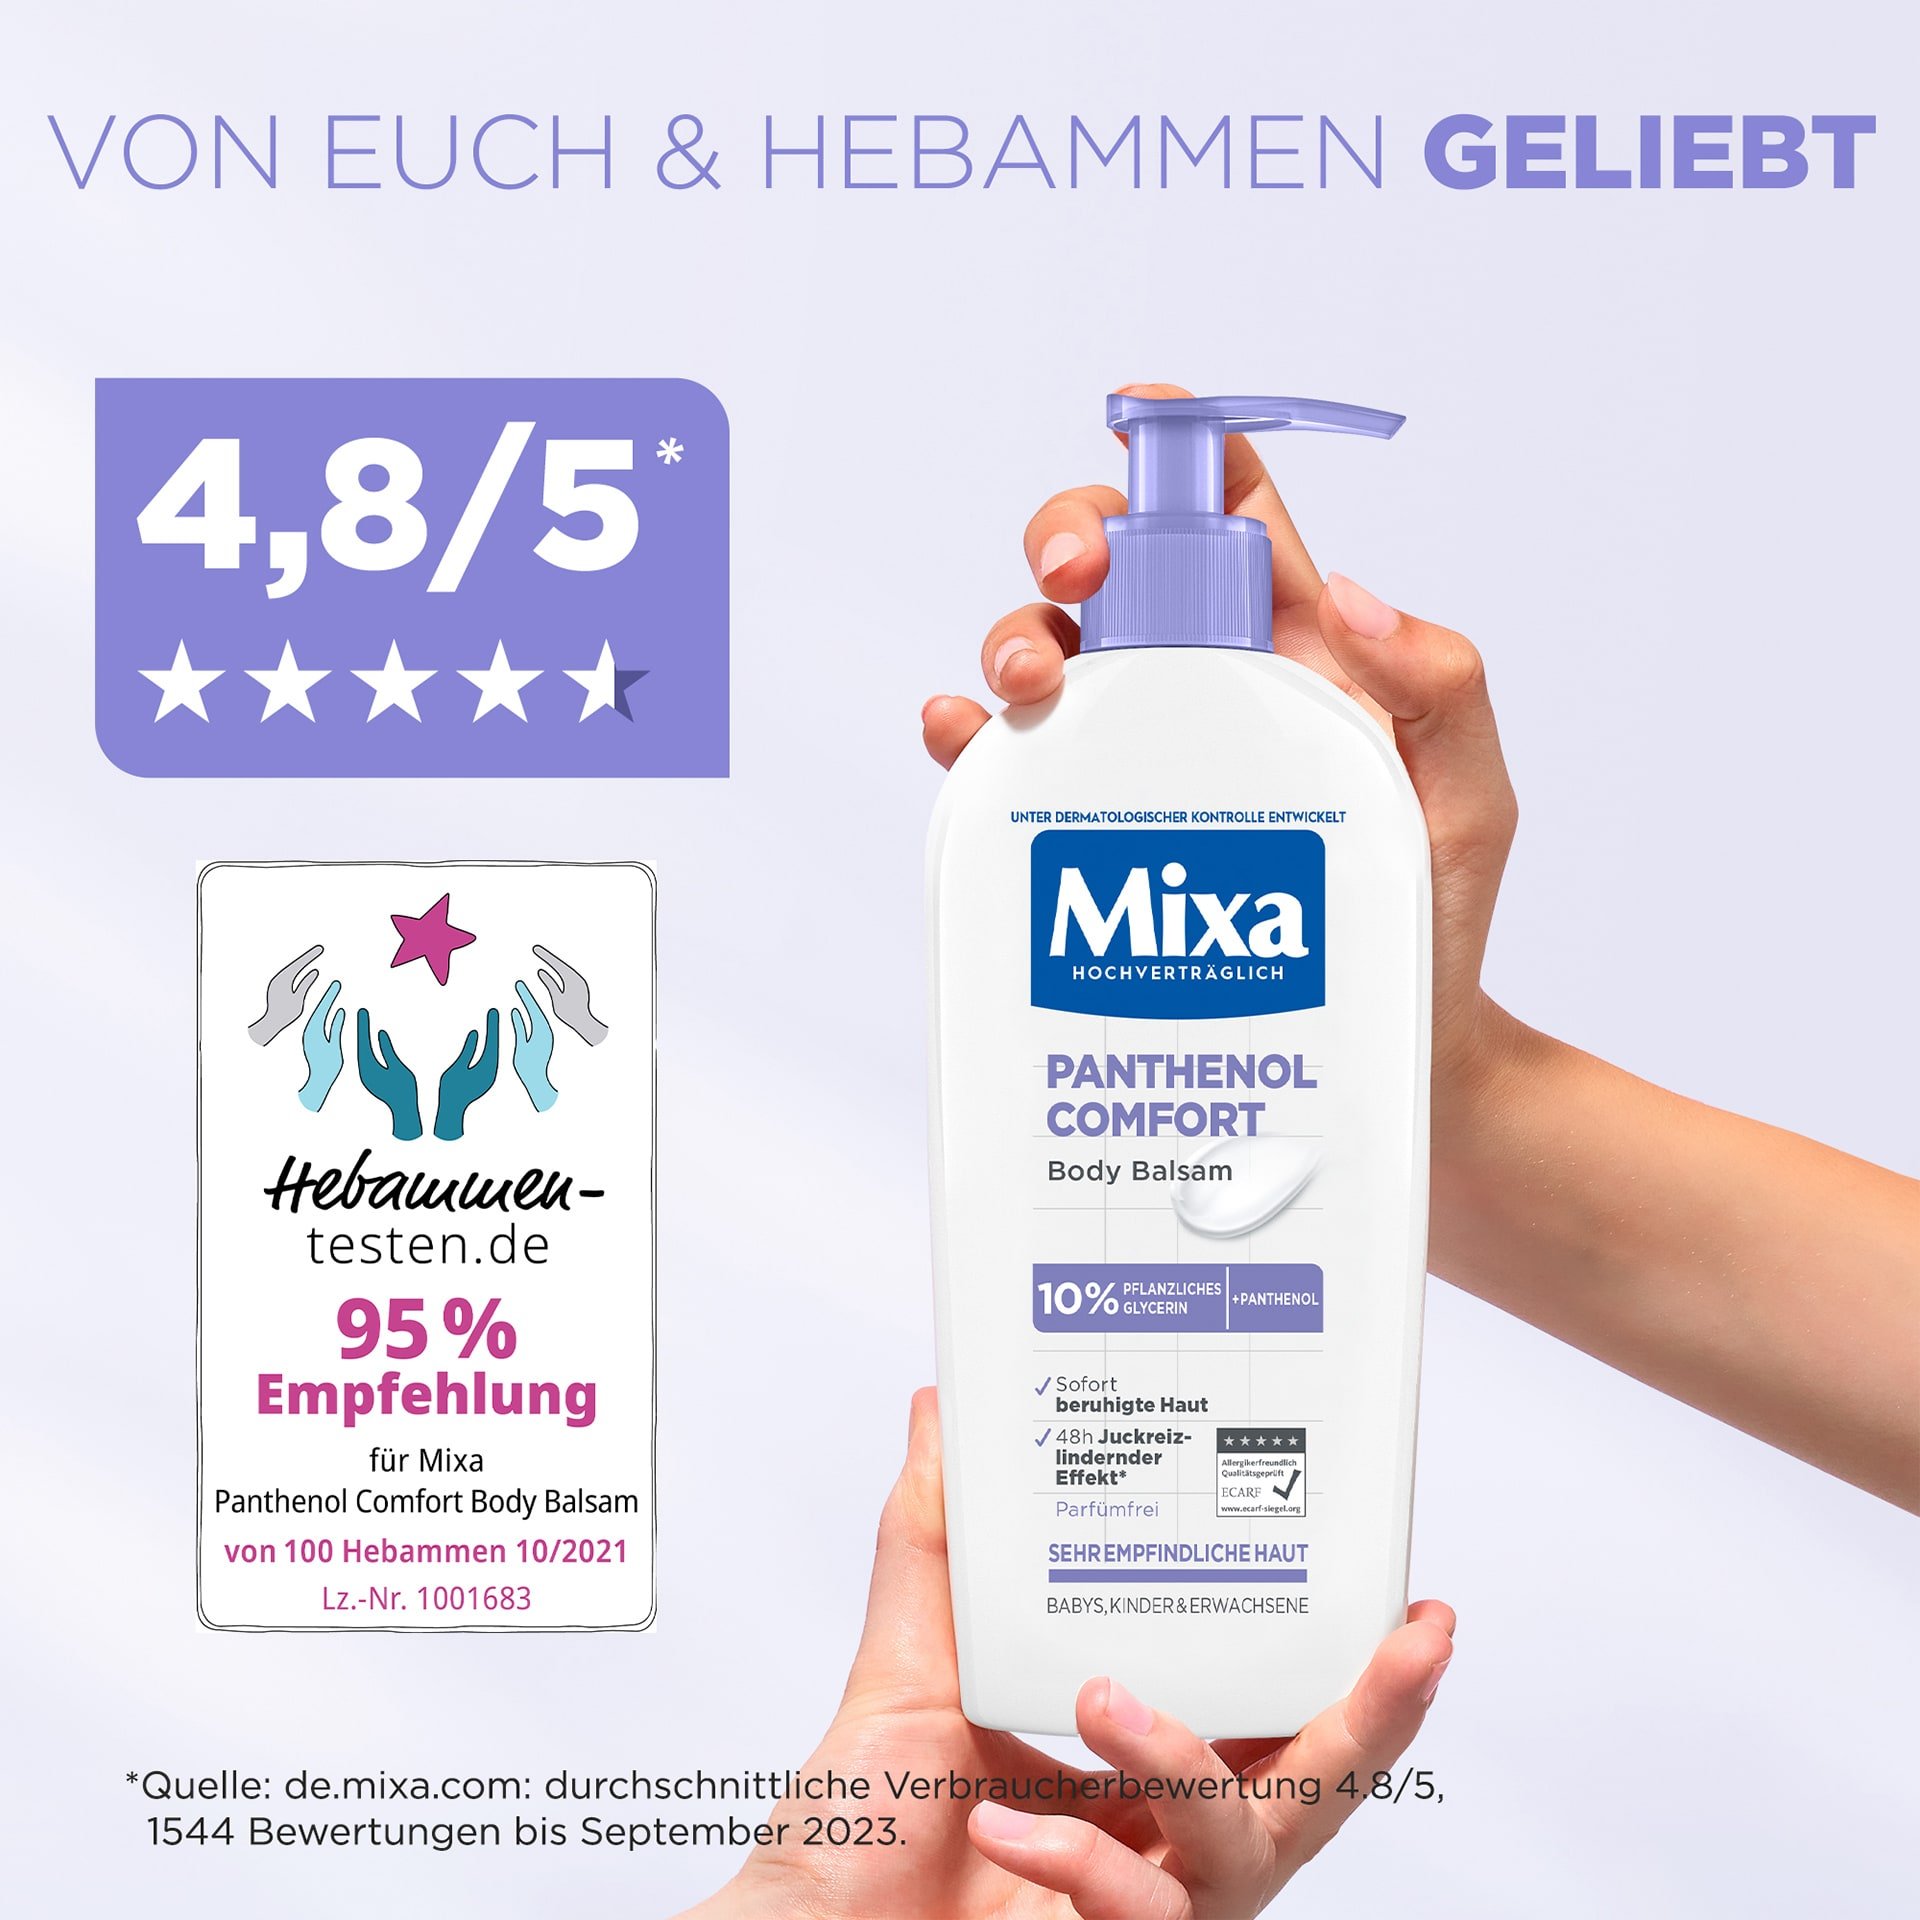 Mixa Panthenol Comfort Soothing Body Lotion for skin prone to atopy 400 ml  - VMD parfumerie - drogerie